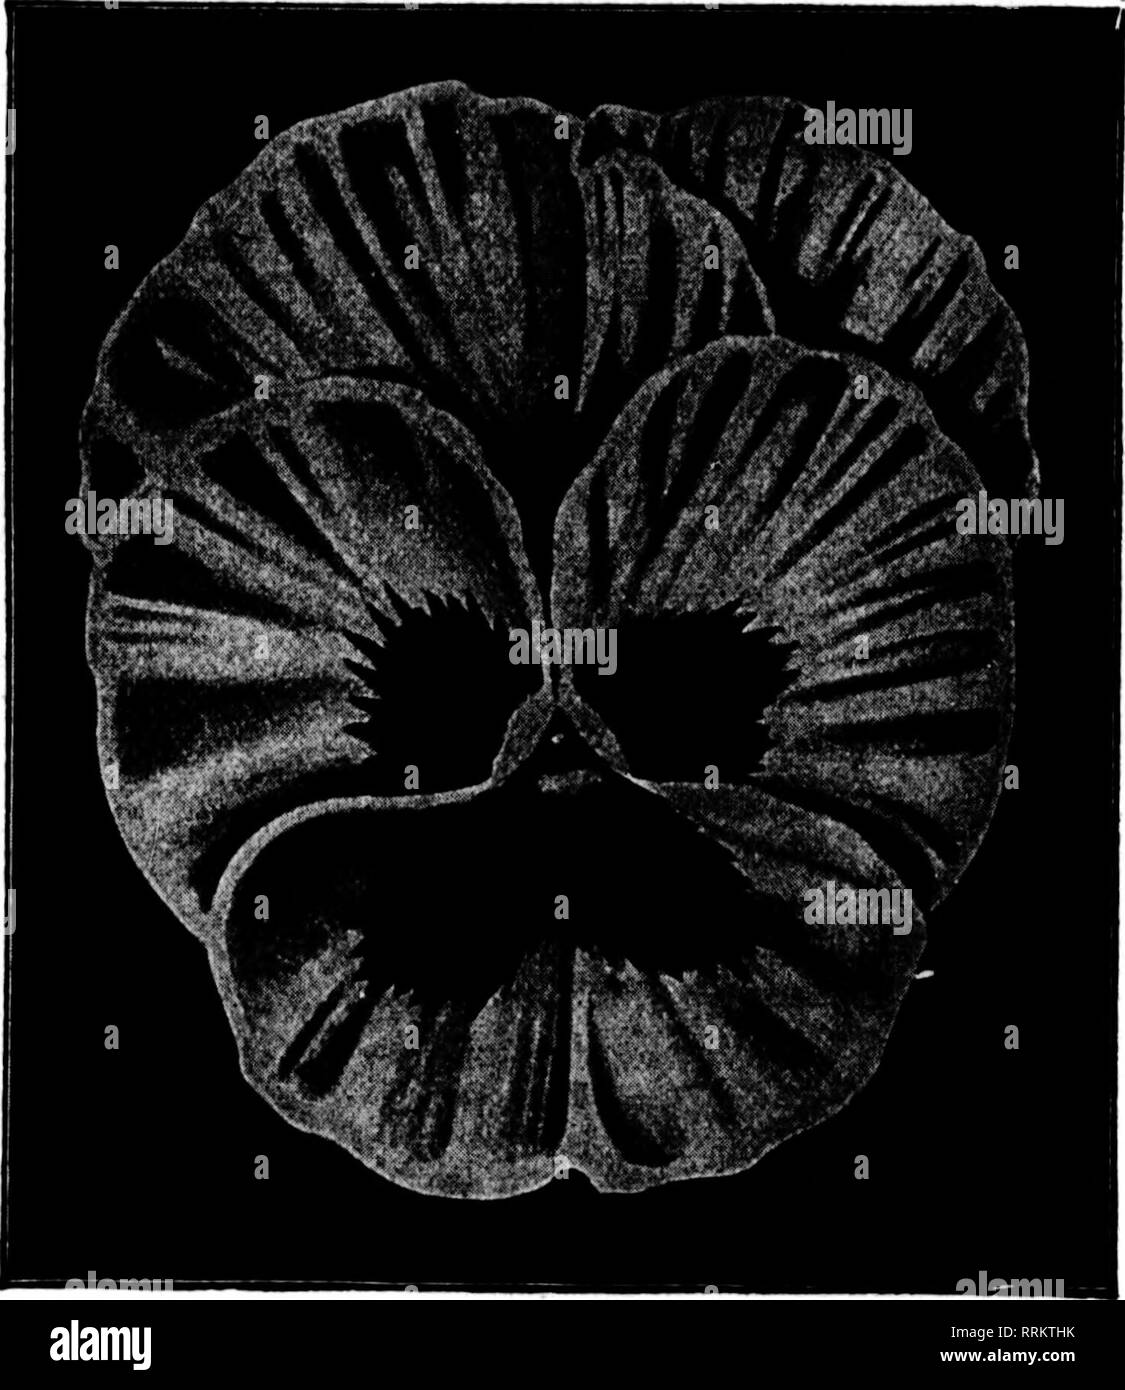 . Florists' review [microform]. Floriculture. 60 The Florists^ Review A. JuNB 7. 1917.. New Early-flowering or Winter- blooming Giant Pansies An entirely new and distinct strain of Pansies. The main ad- vantage of these new Pansies over all hitherto existing Pansies is the extreme earliness of flowering and the unusual hardiness, which enables them to withstand quite severe winters, and to bloom right on into the summer. Sown at the same time as other Pansies, they begin flowering the early part of March, or as soon as the snow is off the ground, many times having four or five large flowers to Stock Photo